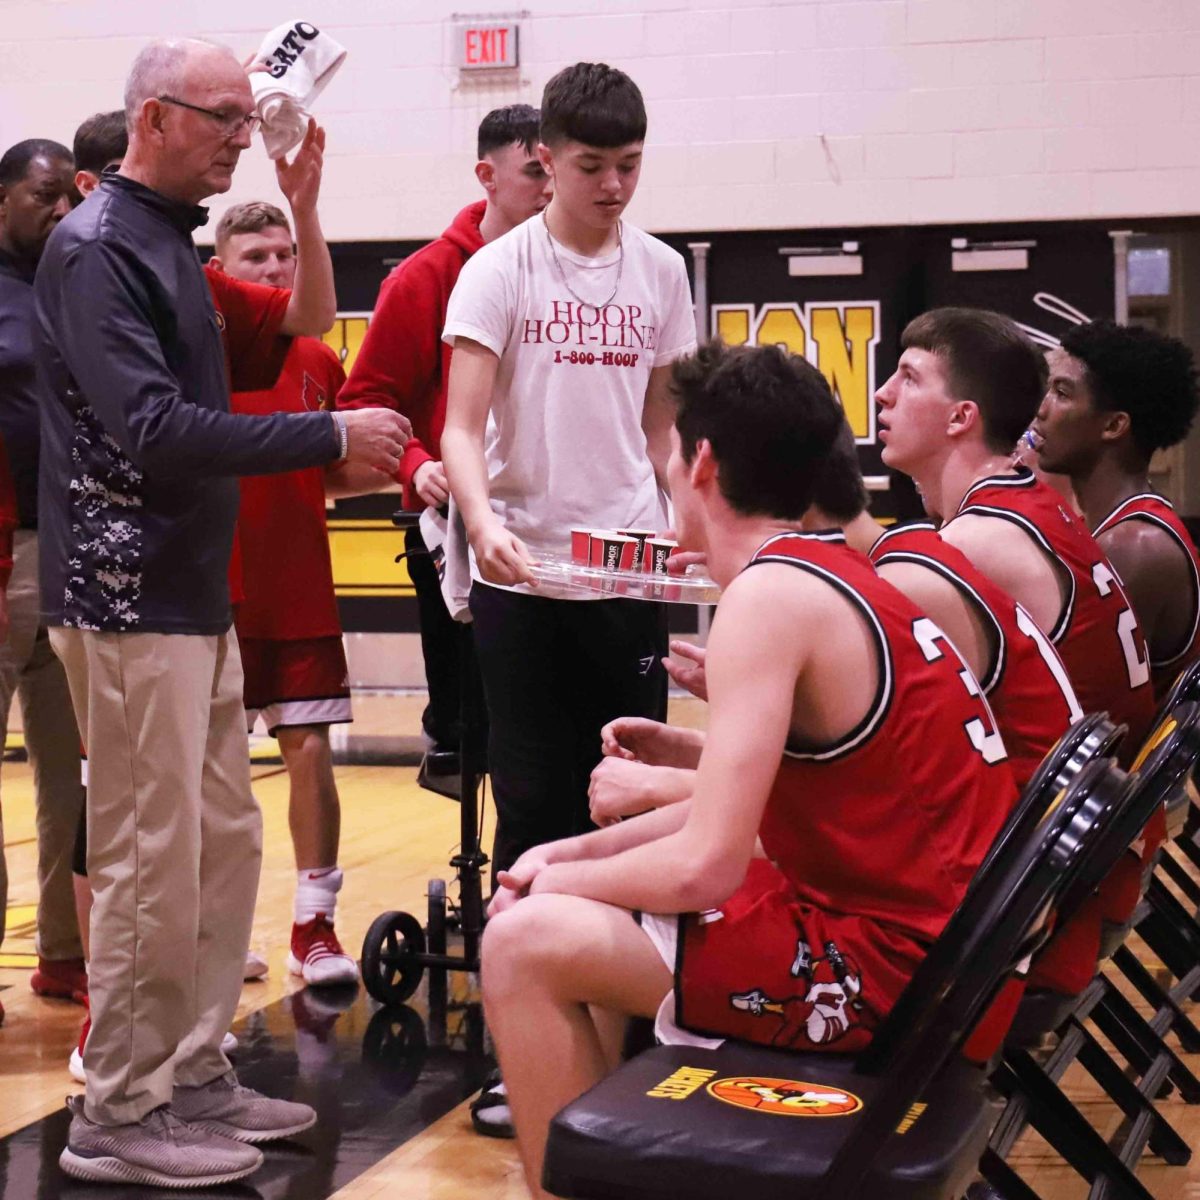 Wayne County coach Rodney Woods talked to his team during a timeout in Saturdays game at Middlesboro. Woods, a Lone Jack graduate who played at the University of Tennessee in the 1970s, has won over 800 games in his 44-year coaching career.